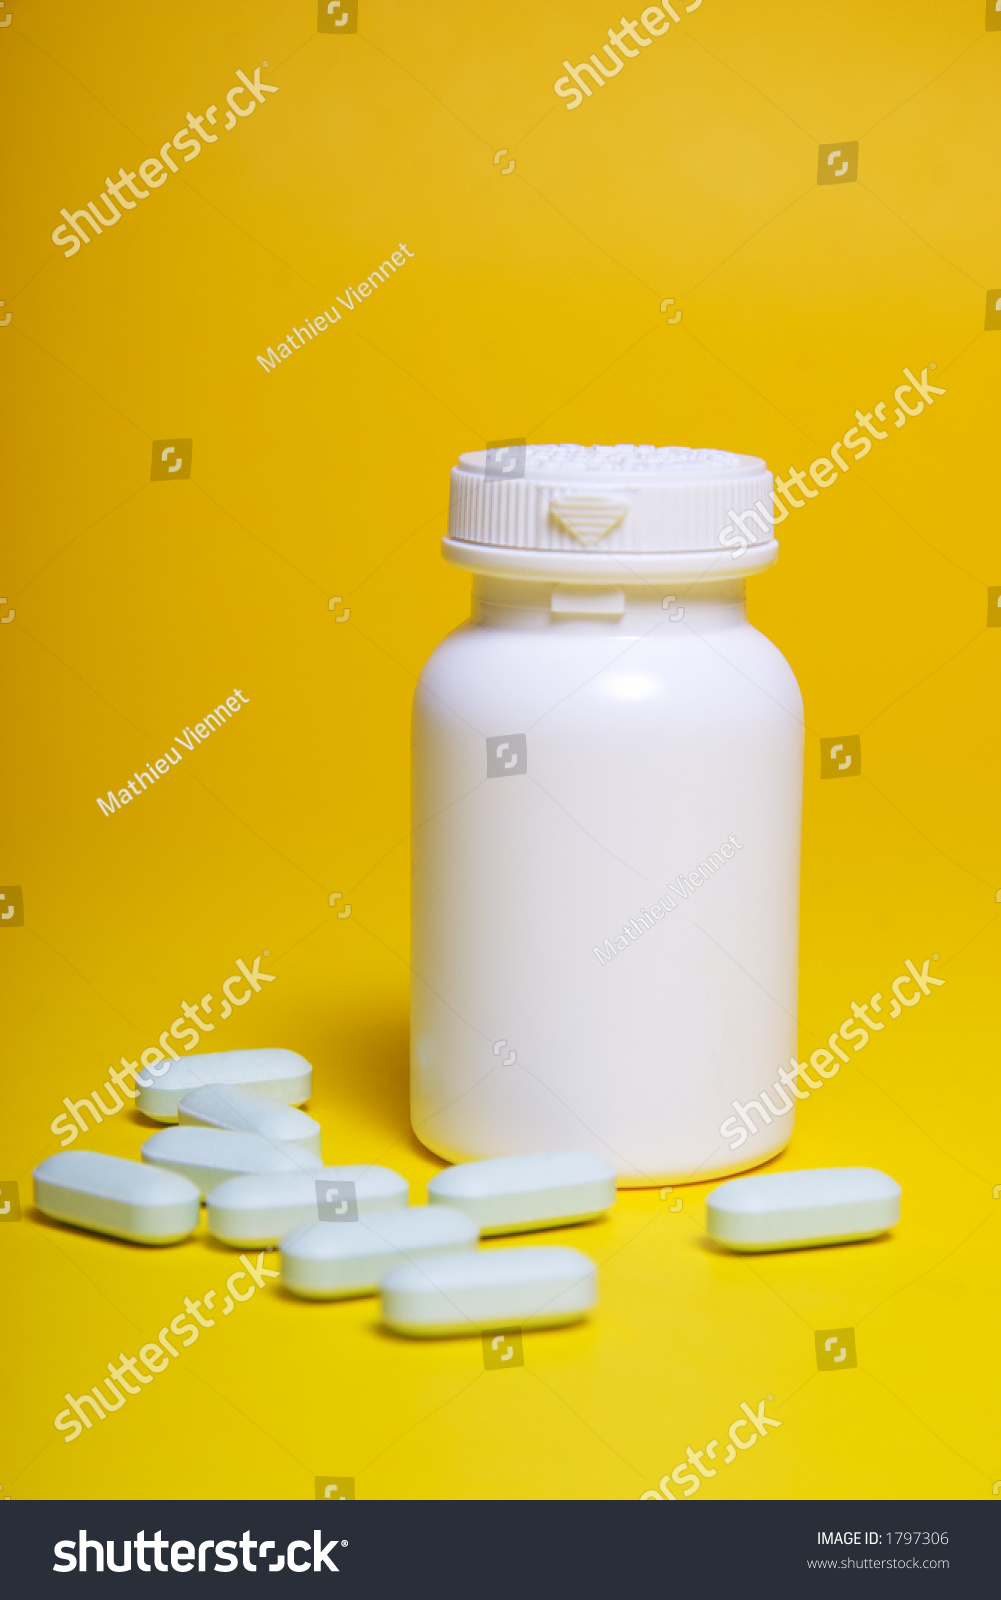 Download Blue Pills Bottle On Yellow Background Stock Photo Edit Now 1797306 Yellowimages Mockups